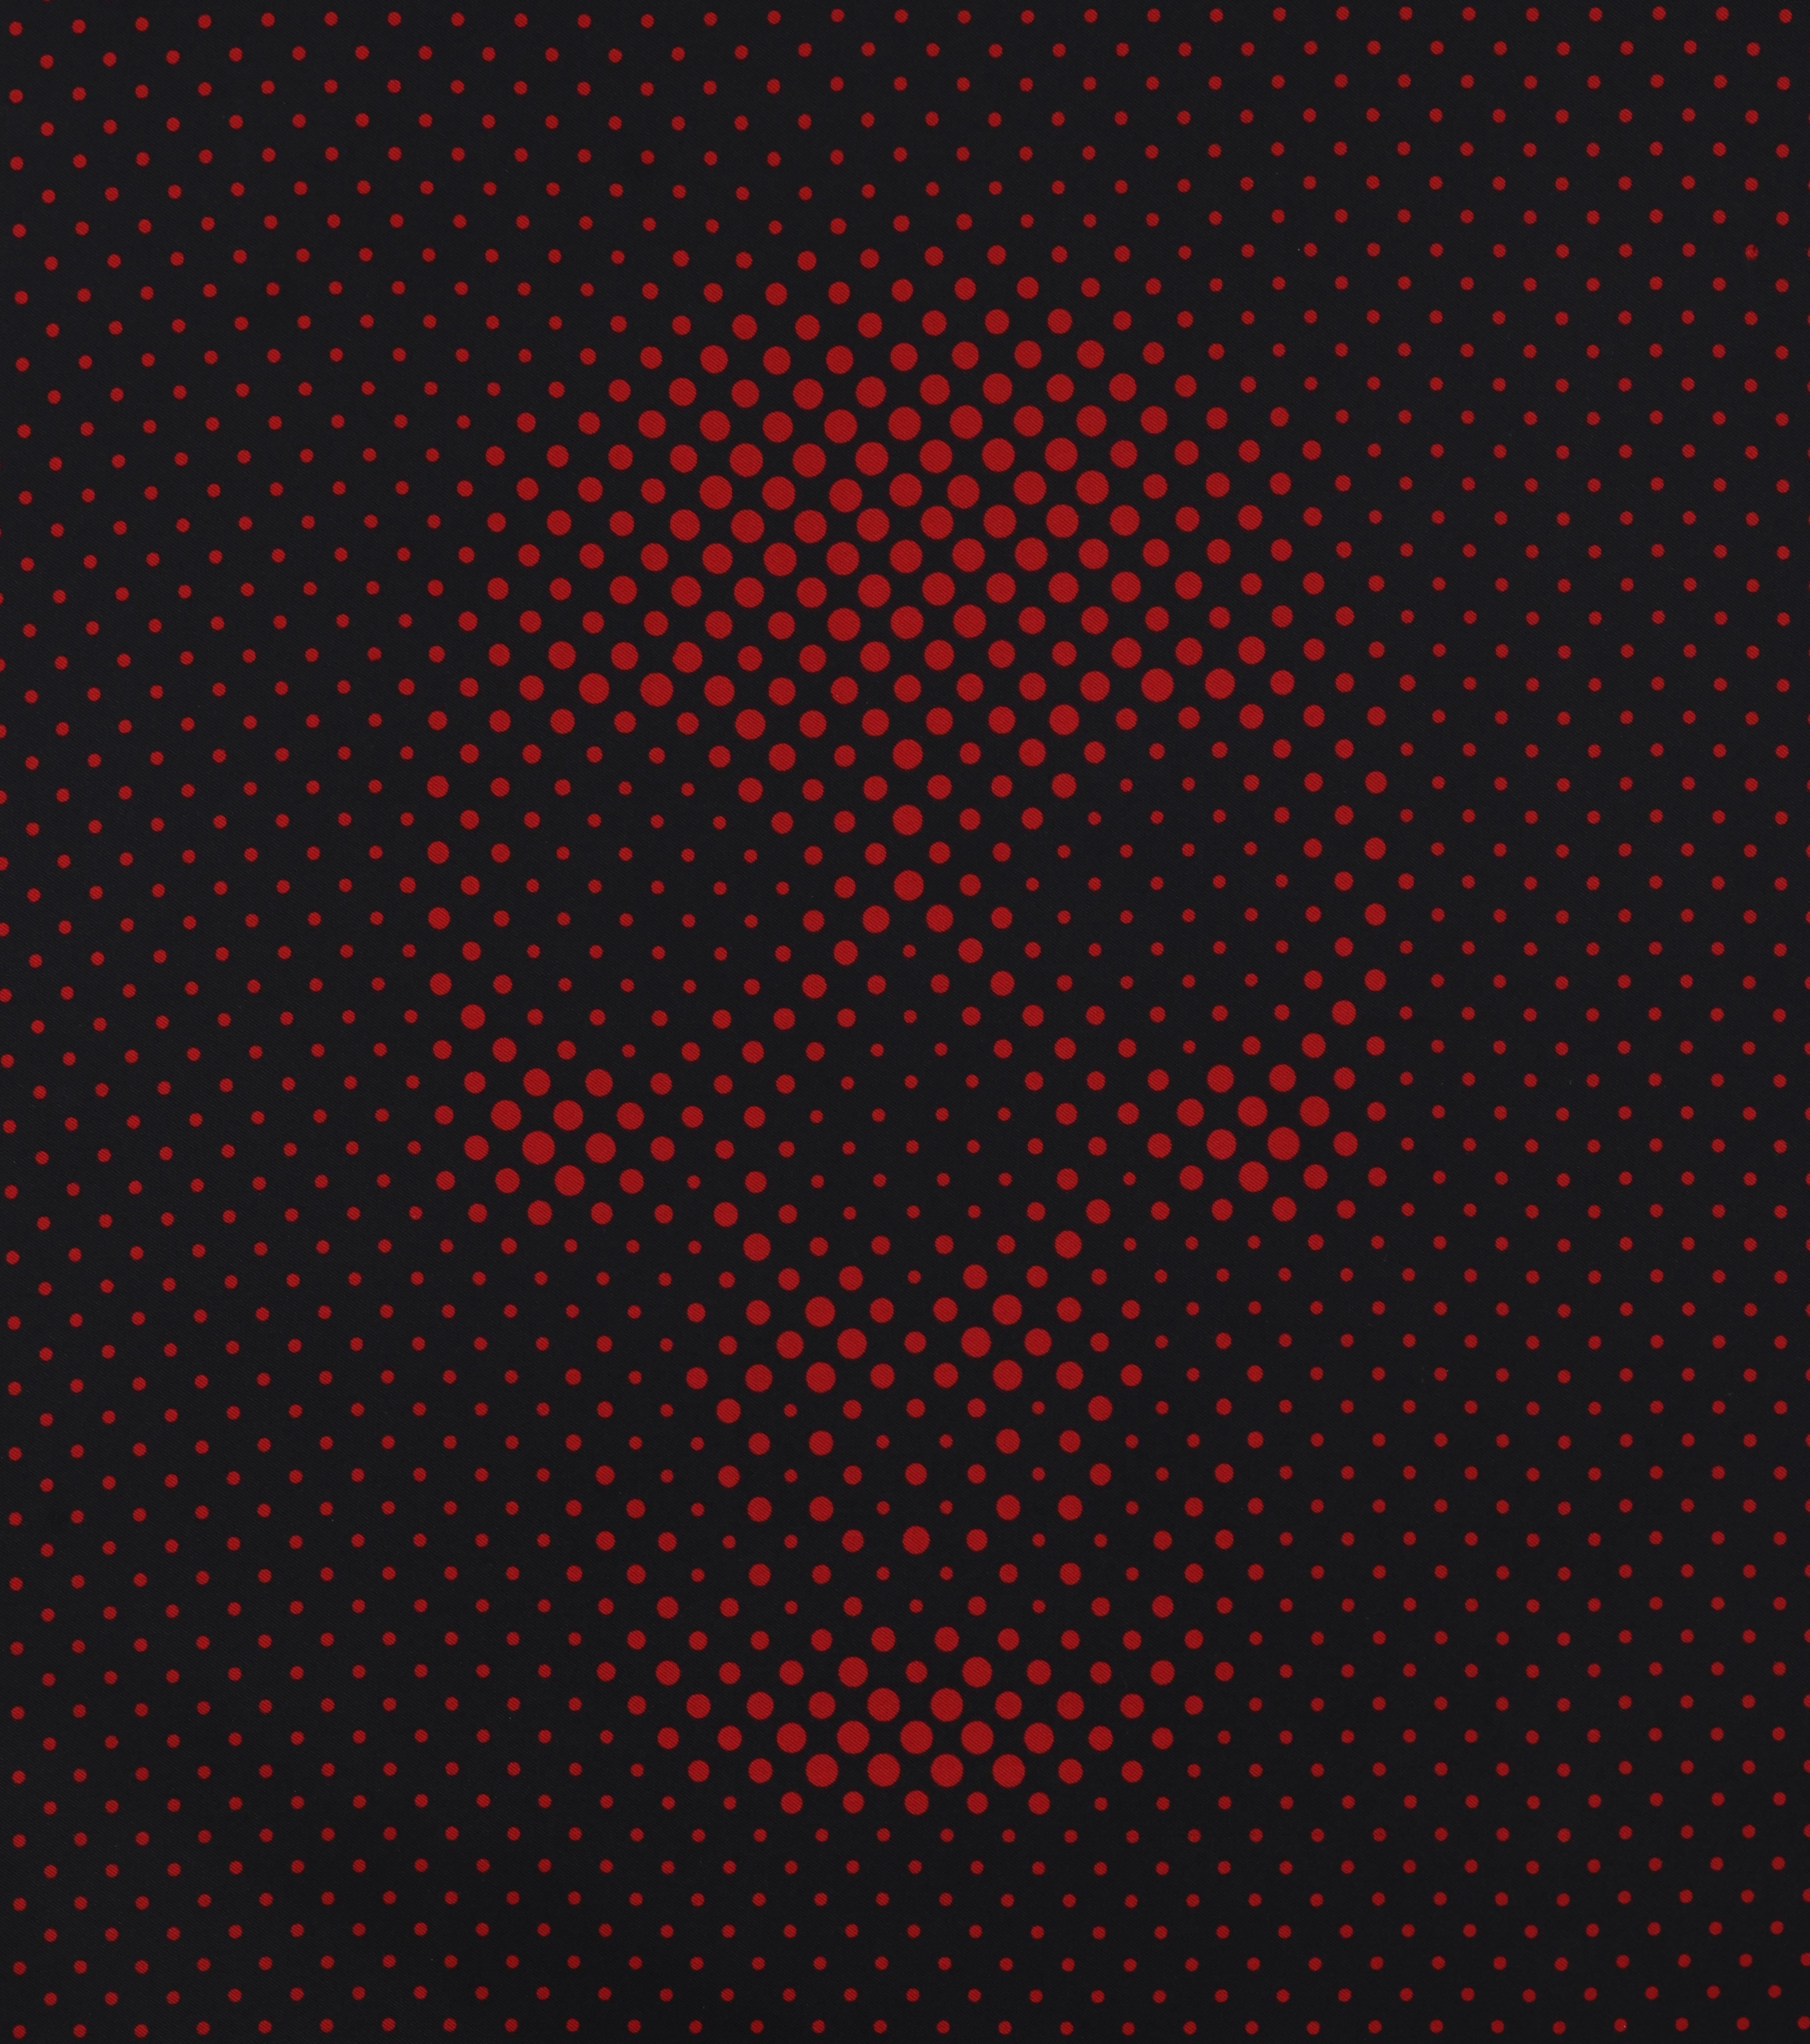 ALEXANDER McQUEEN A/W 2012 Black Red Pointillism Skull Pattern Silk Square Scarf
 
Brand/Manufacturer: Alexander McQueen
Collection: A/W 2012 
Designer: Sarah Burton
Style: Square scarf
Color(s): Black and red
Marked Fabric Content: “100% Silk”